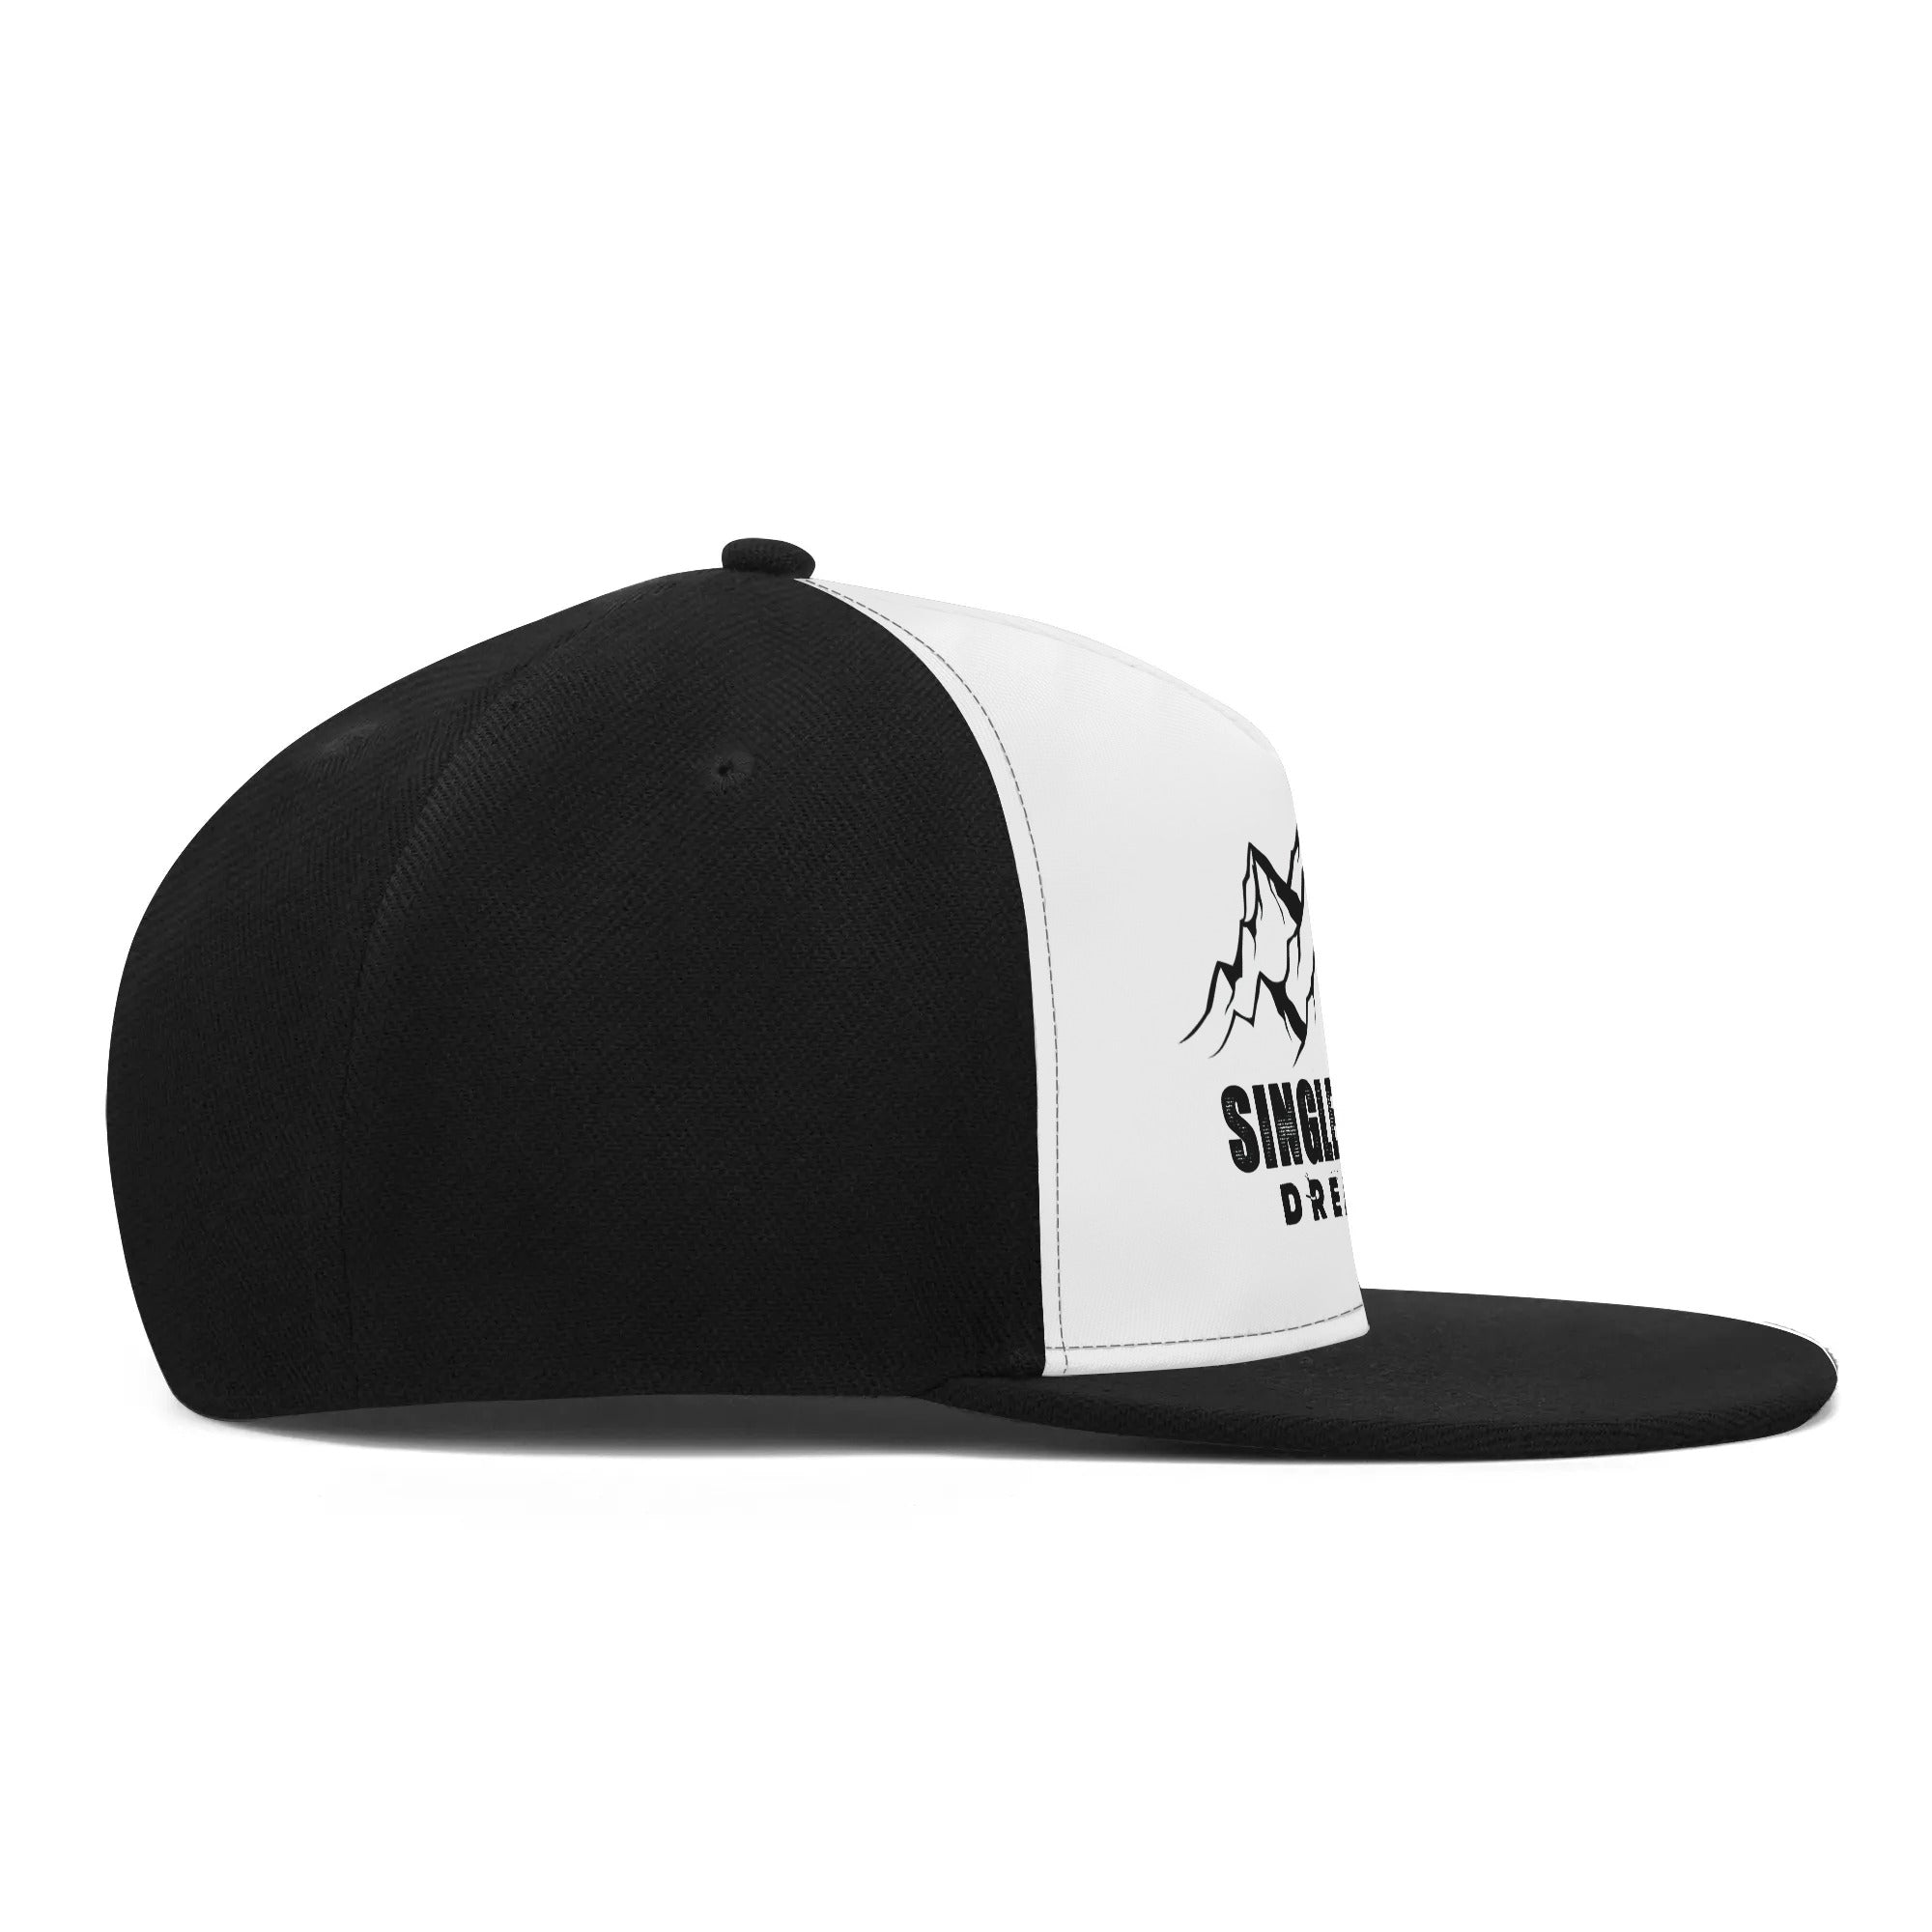 a black and white hat with a black peak